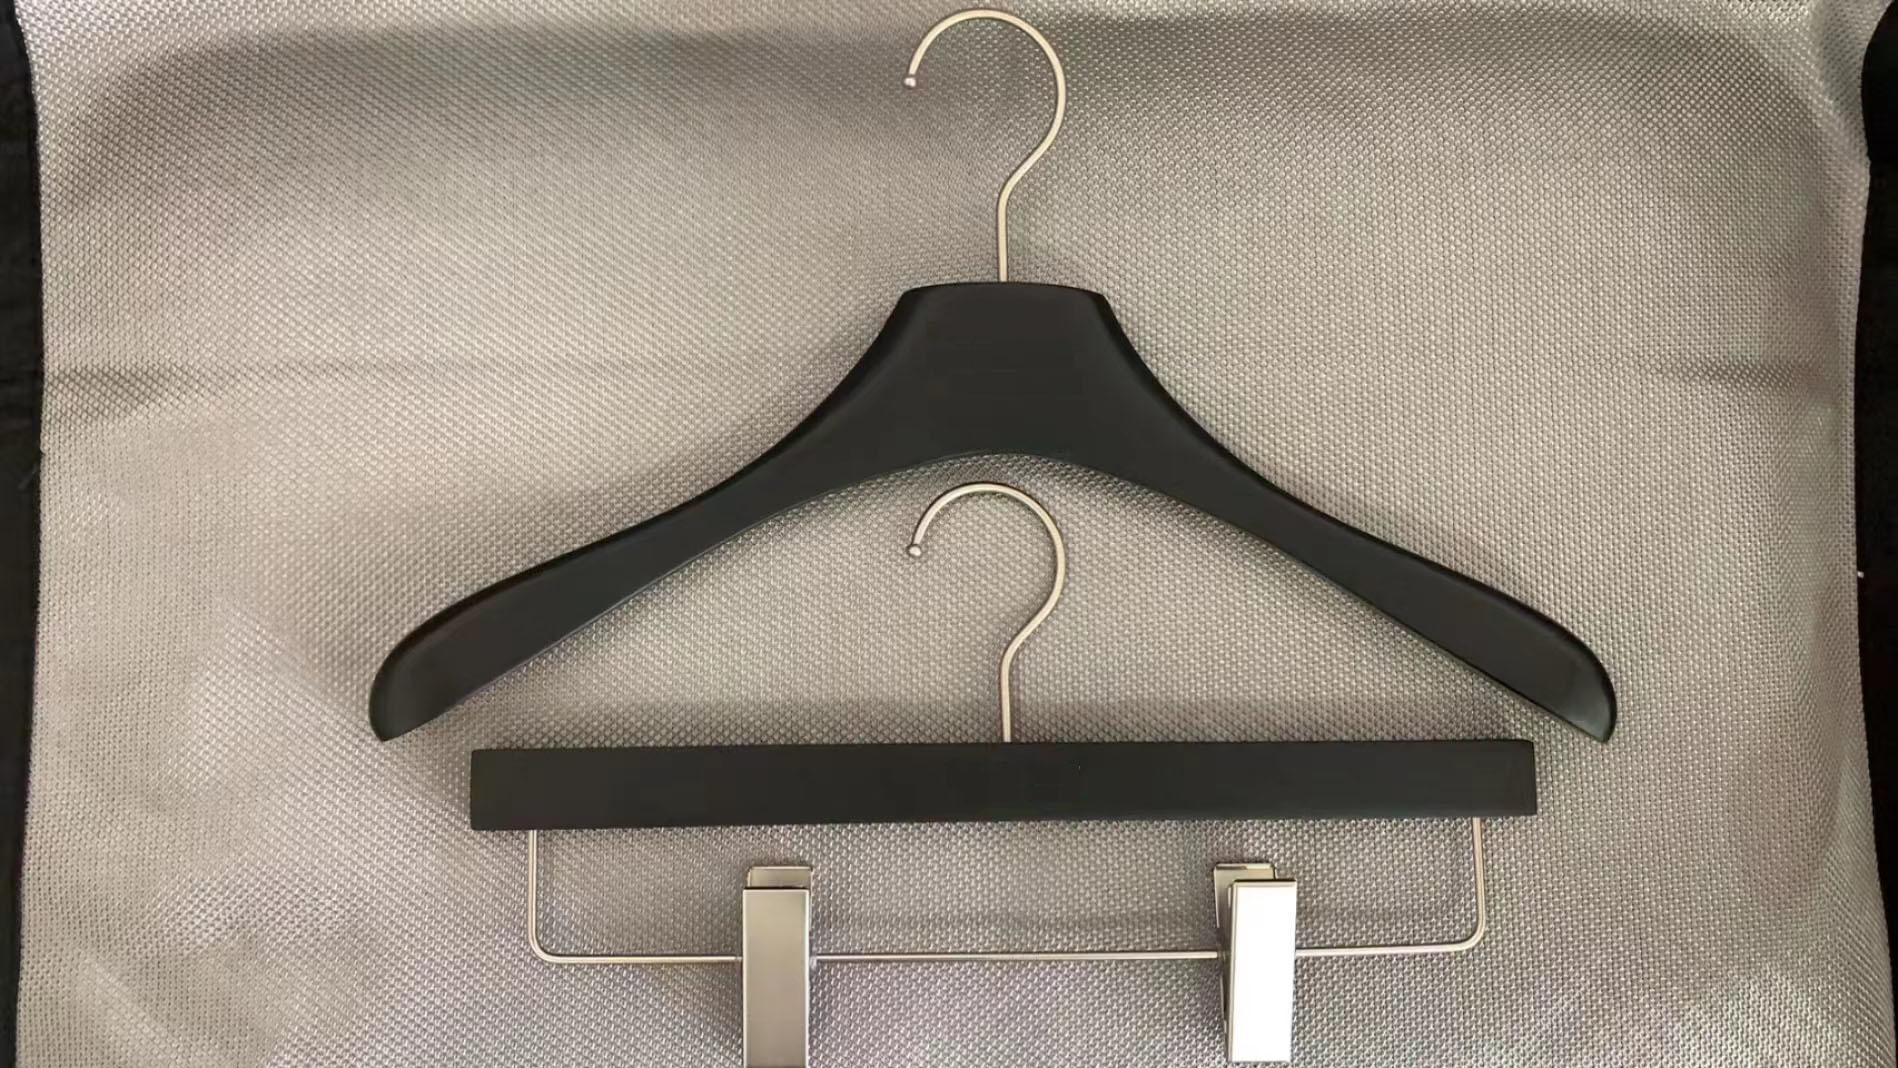 Exported quality on hangers